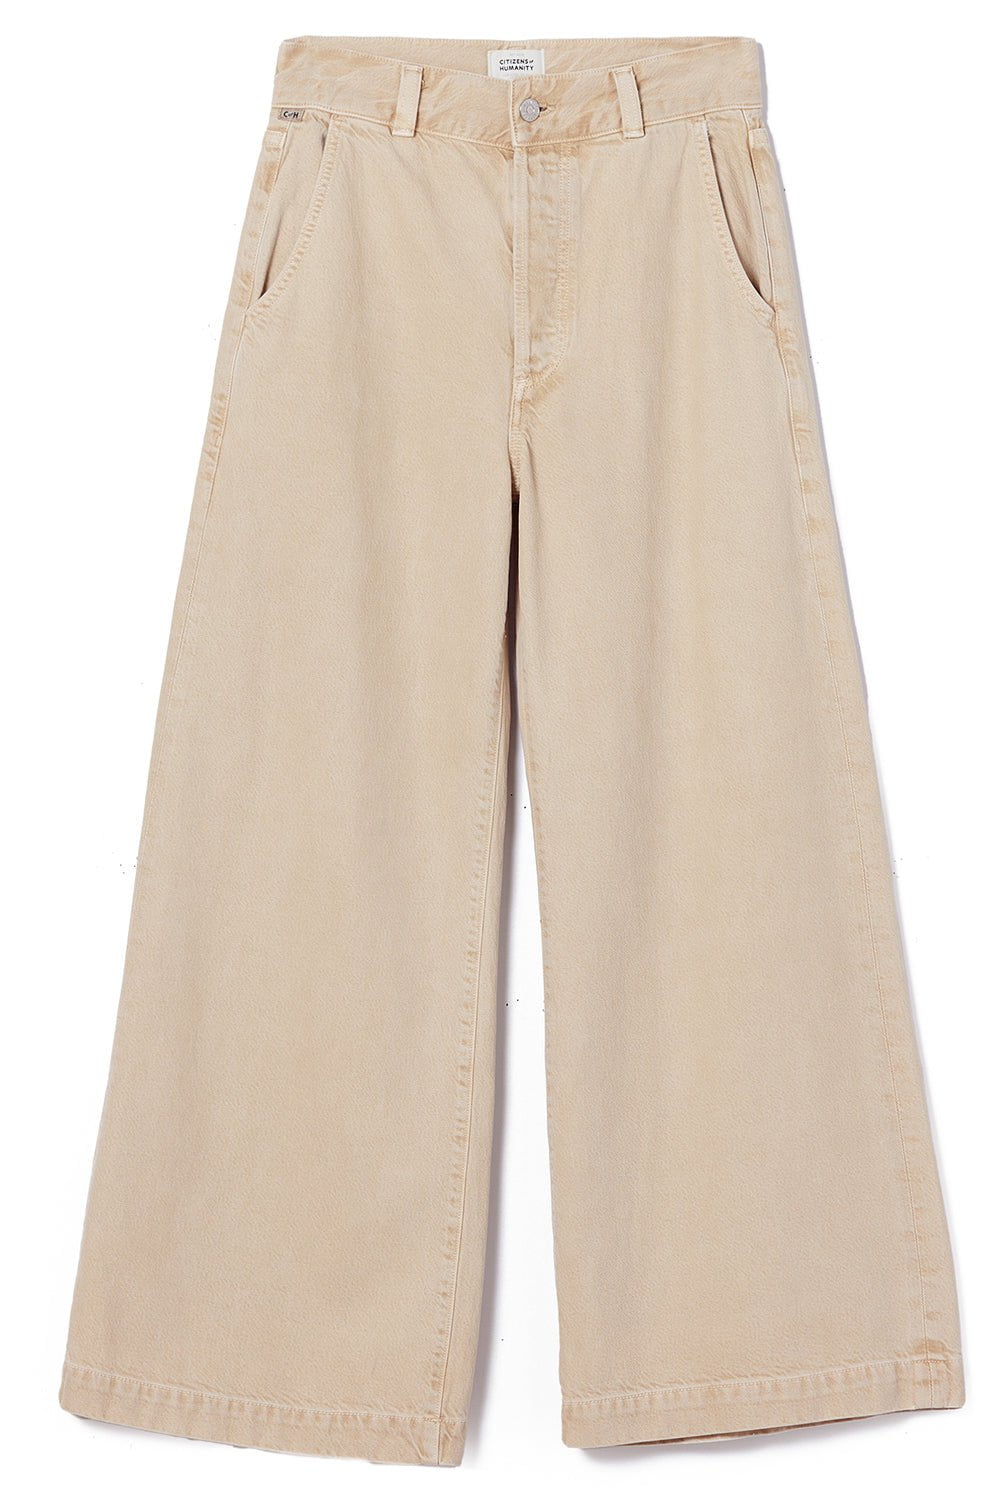 CITIZENS of HUMANITY-Beverly Trouser-